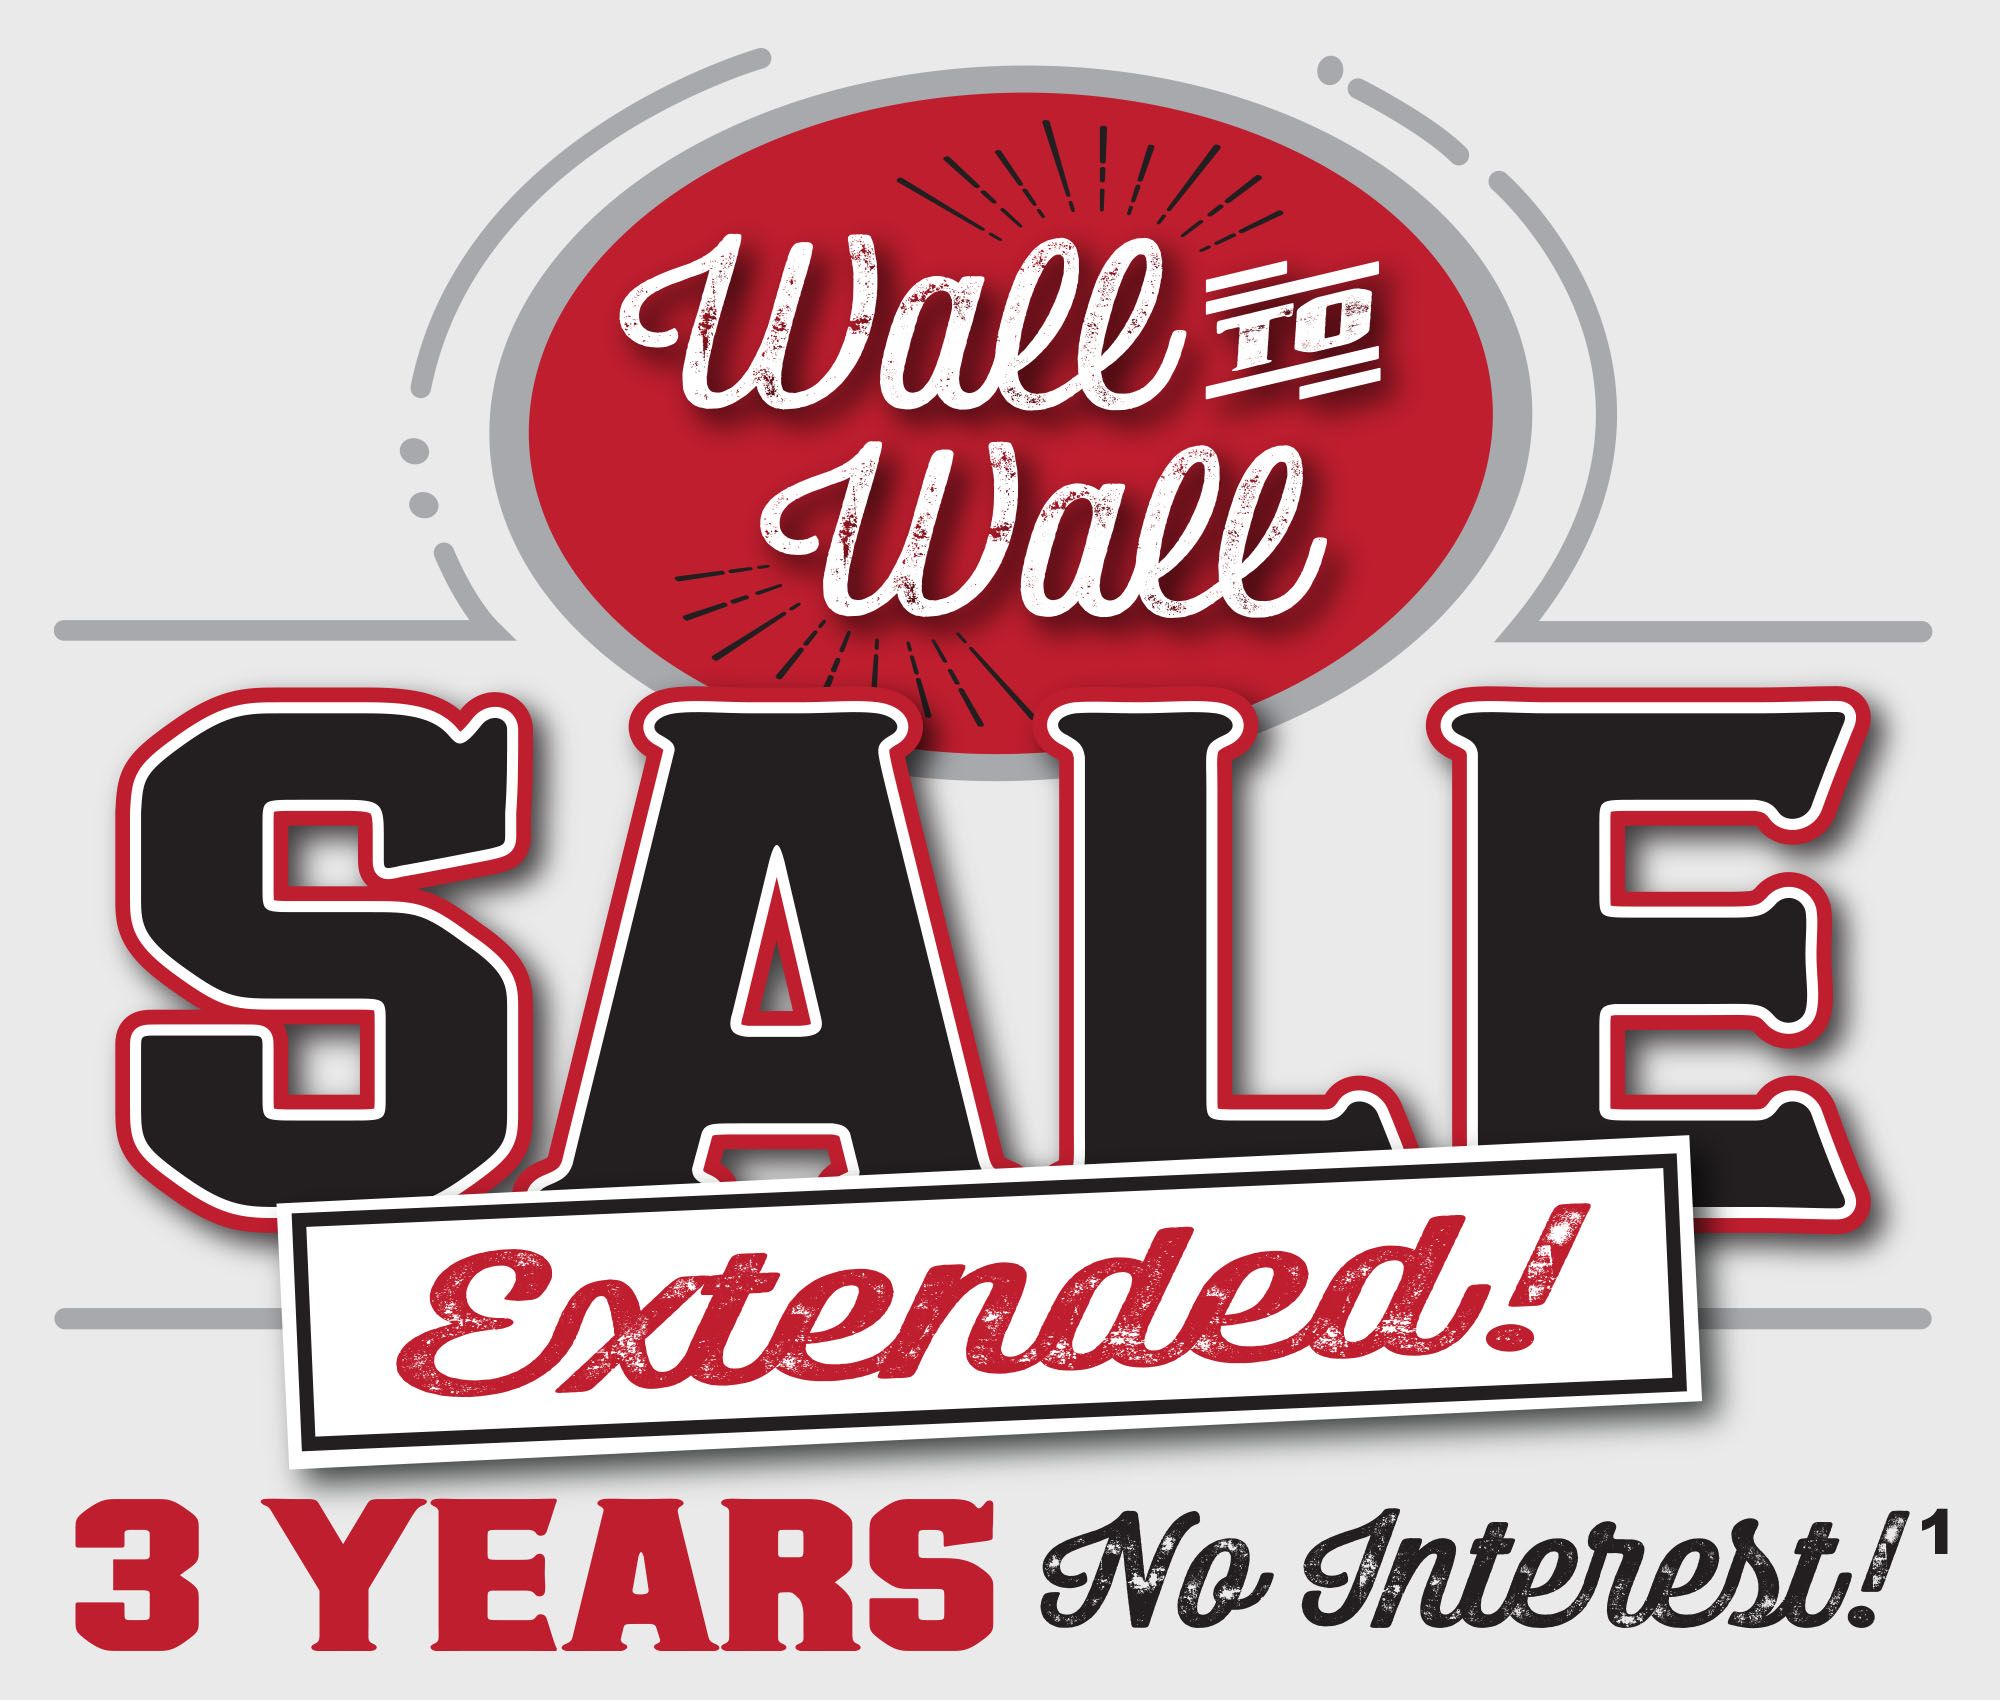 Wall to Wall Sale Extended